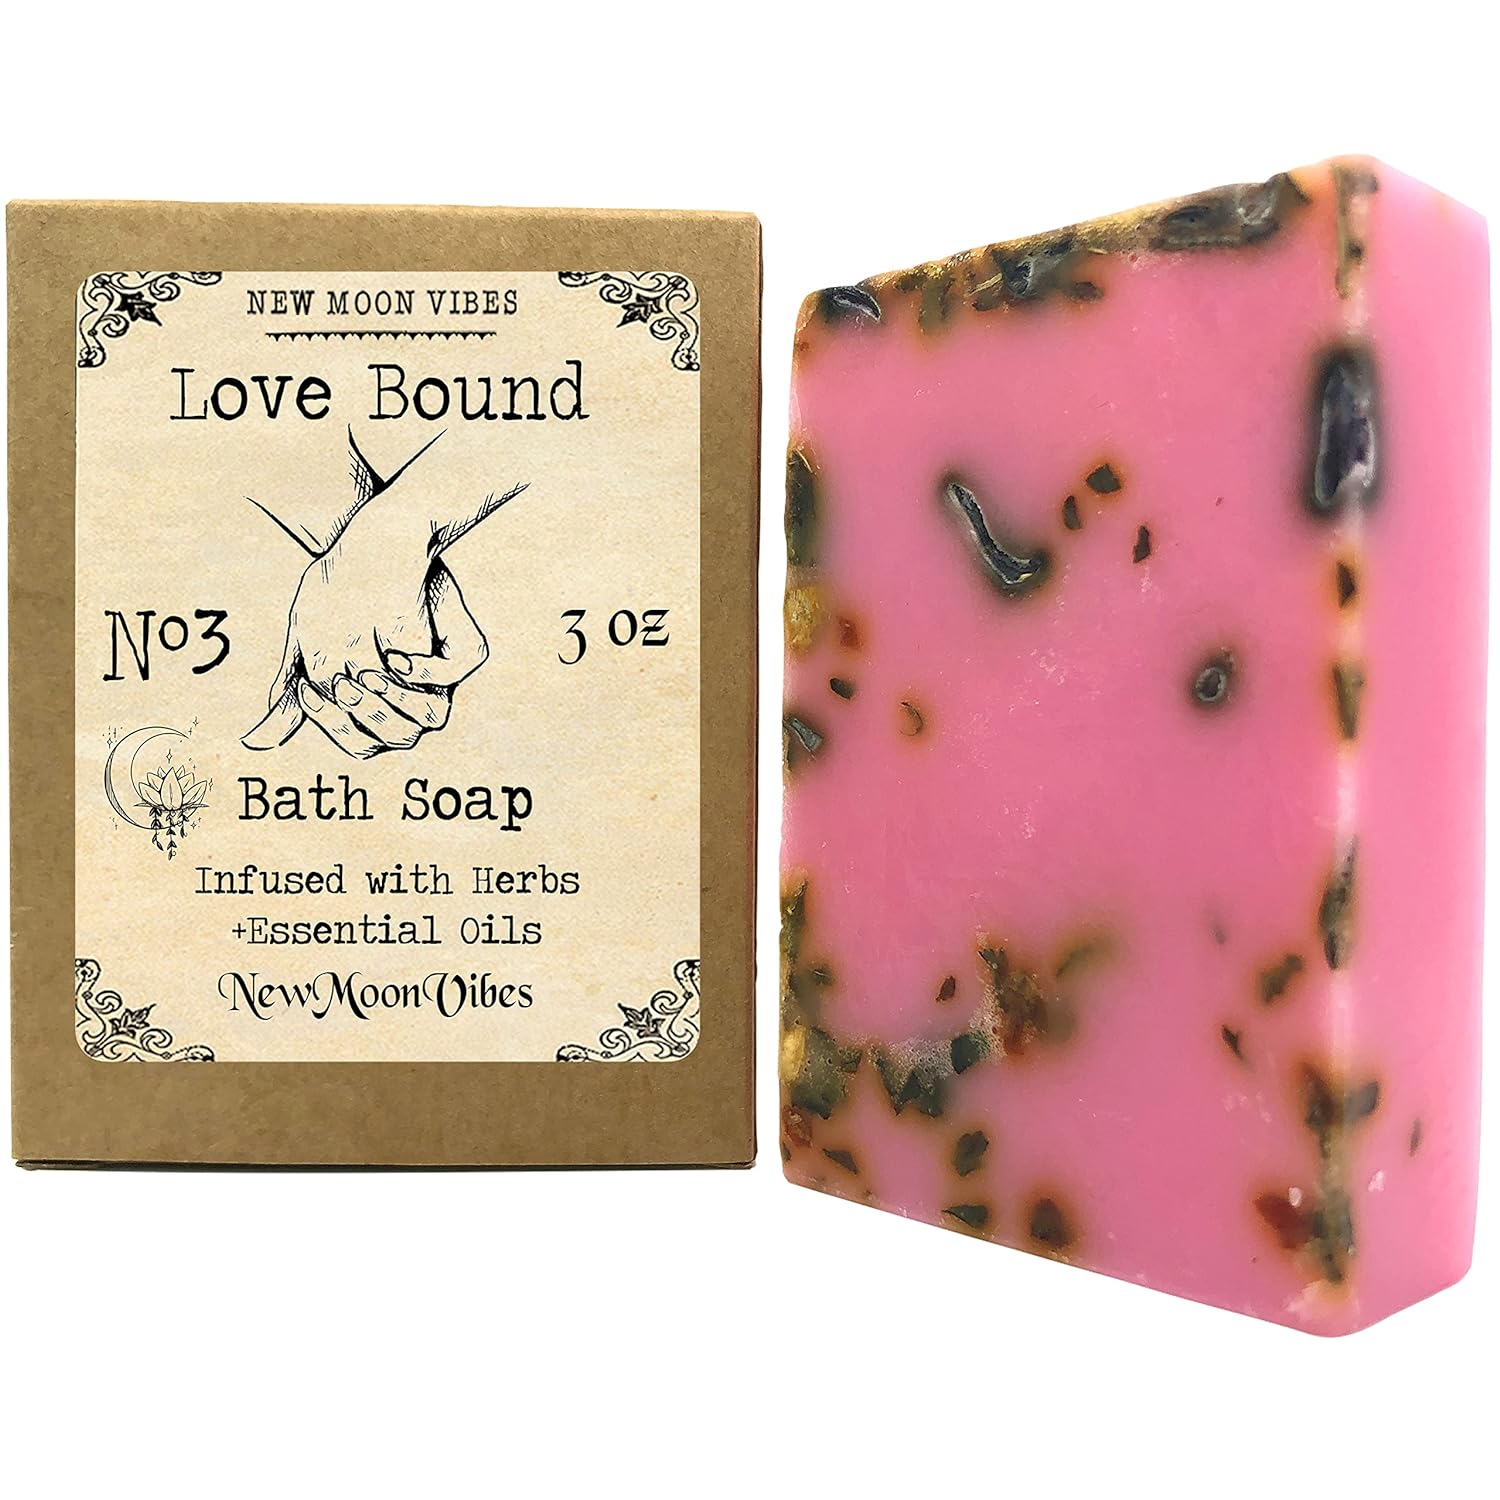 THE TUTU FAIRY Love Bound Essential Oils Herbal Ritual Bath Soap Bar Infused with Essential Oils Real Herbs Botanicals Scented Manifest Commitment Binding Love Fidelity between Lovers Obsession